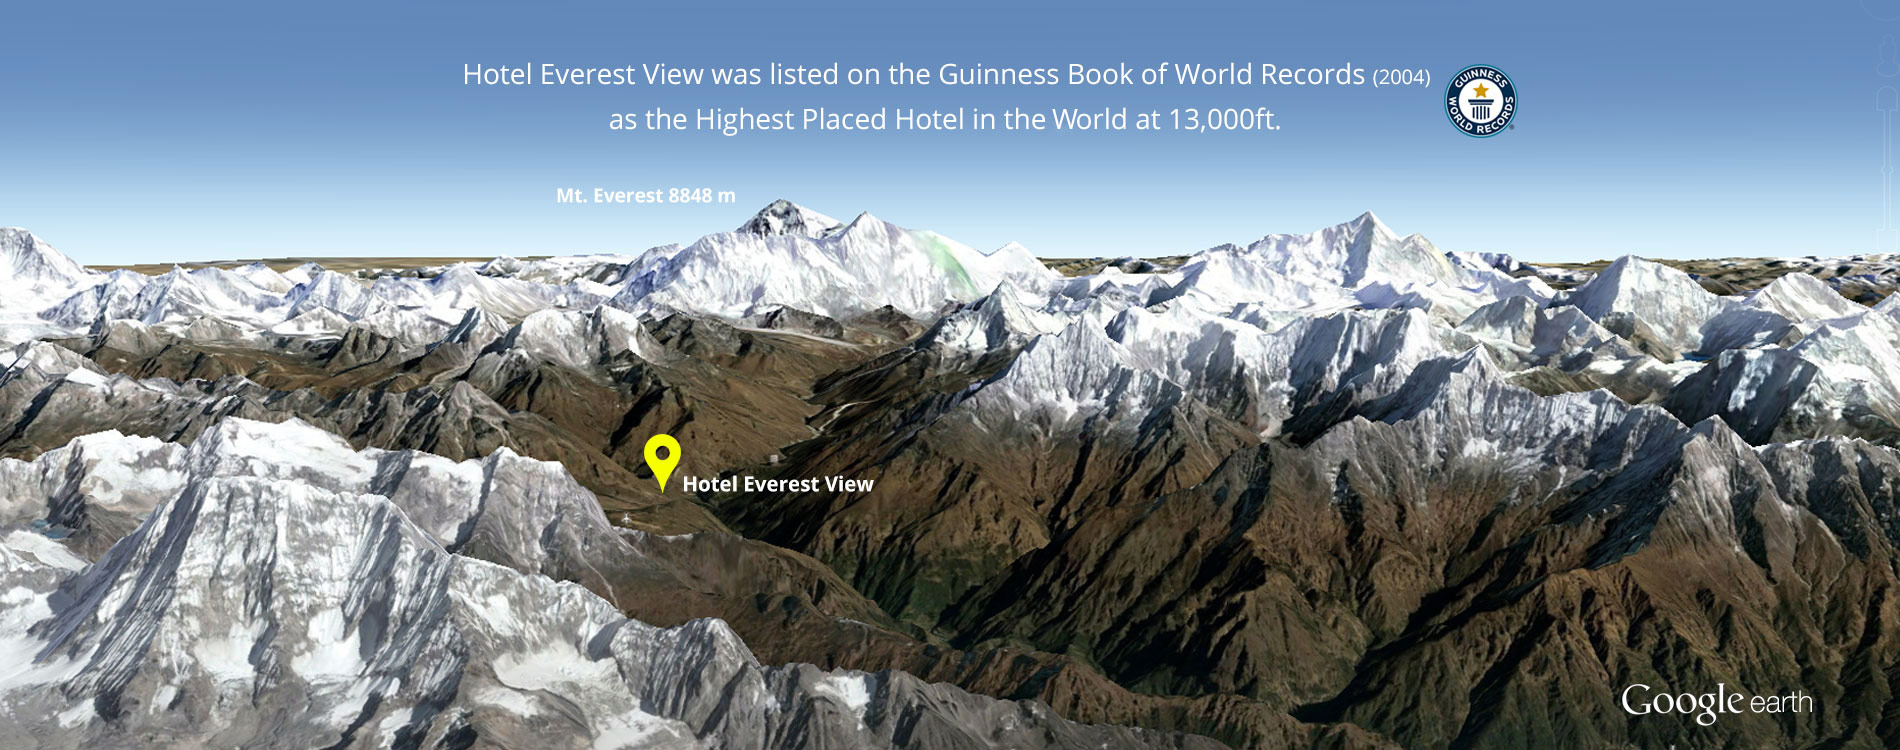 Google earth Hotel Everest View location